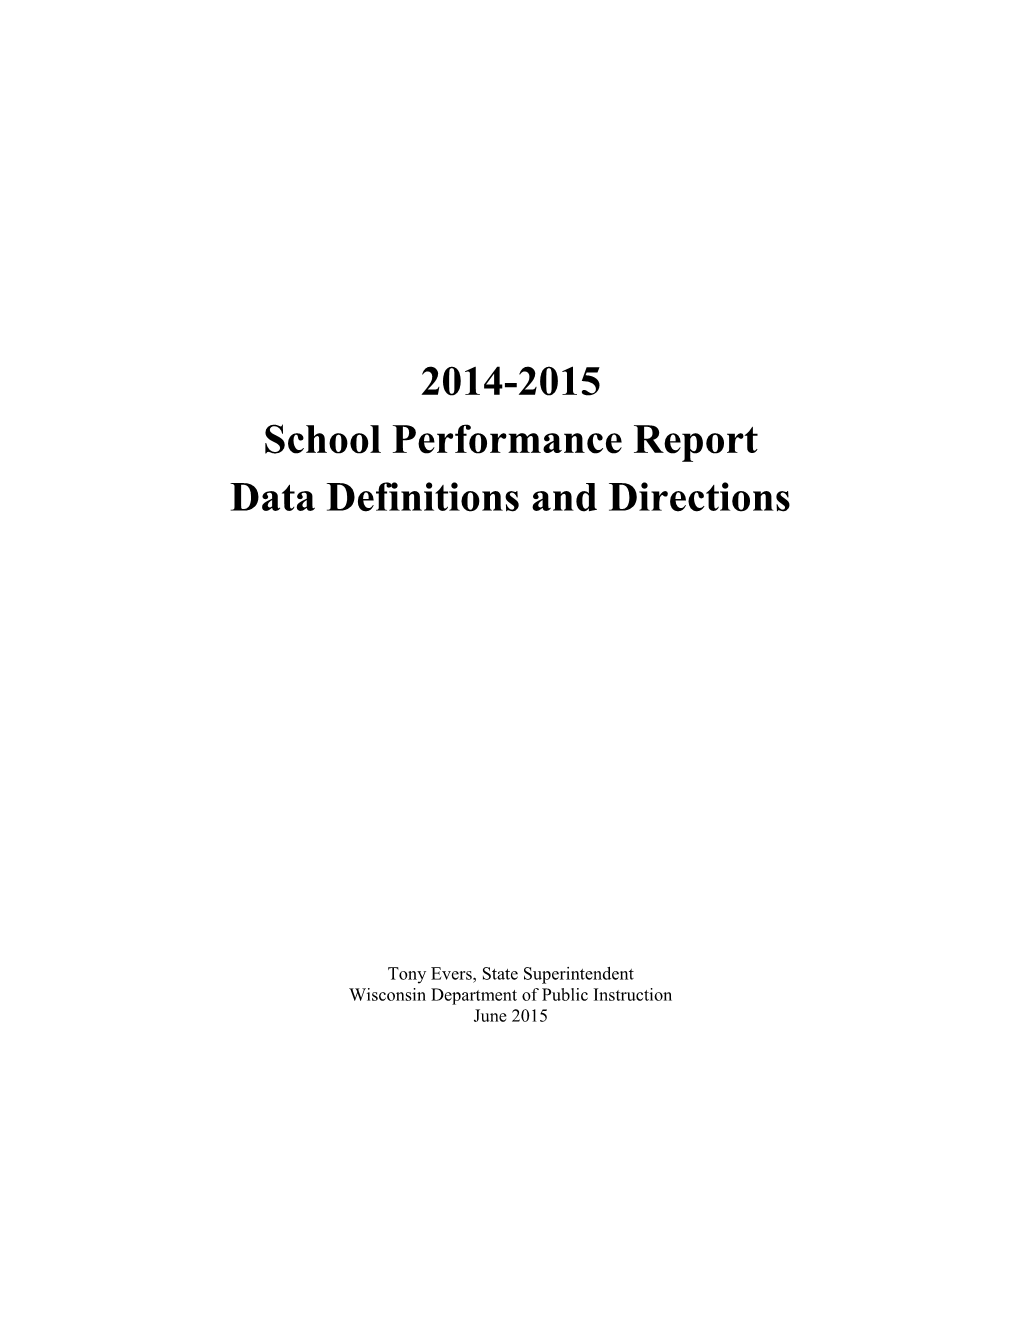 Changes to the School Performance Report 1999-00 Data Collection